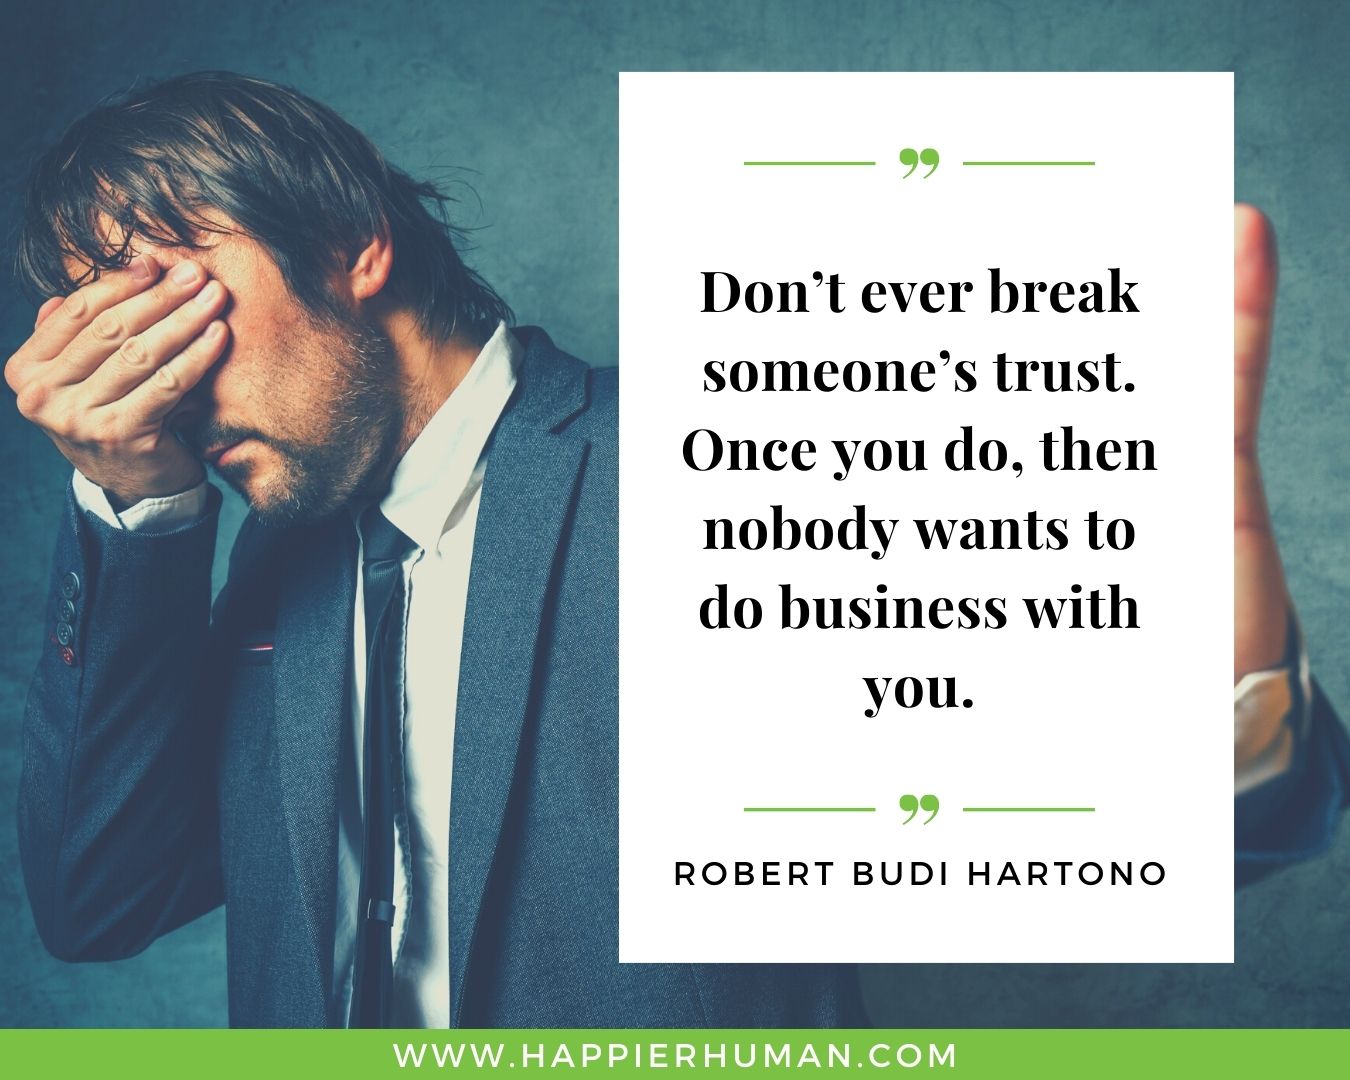 Broken Trust Quotes - “Don’t ever break someone’s trust. Once you do, then nobody wants to do business with you.” - Robert Budi Hartono